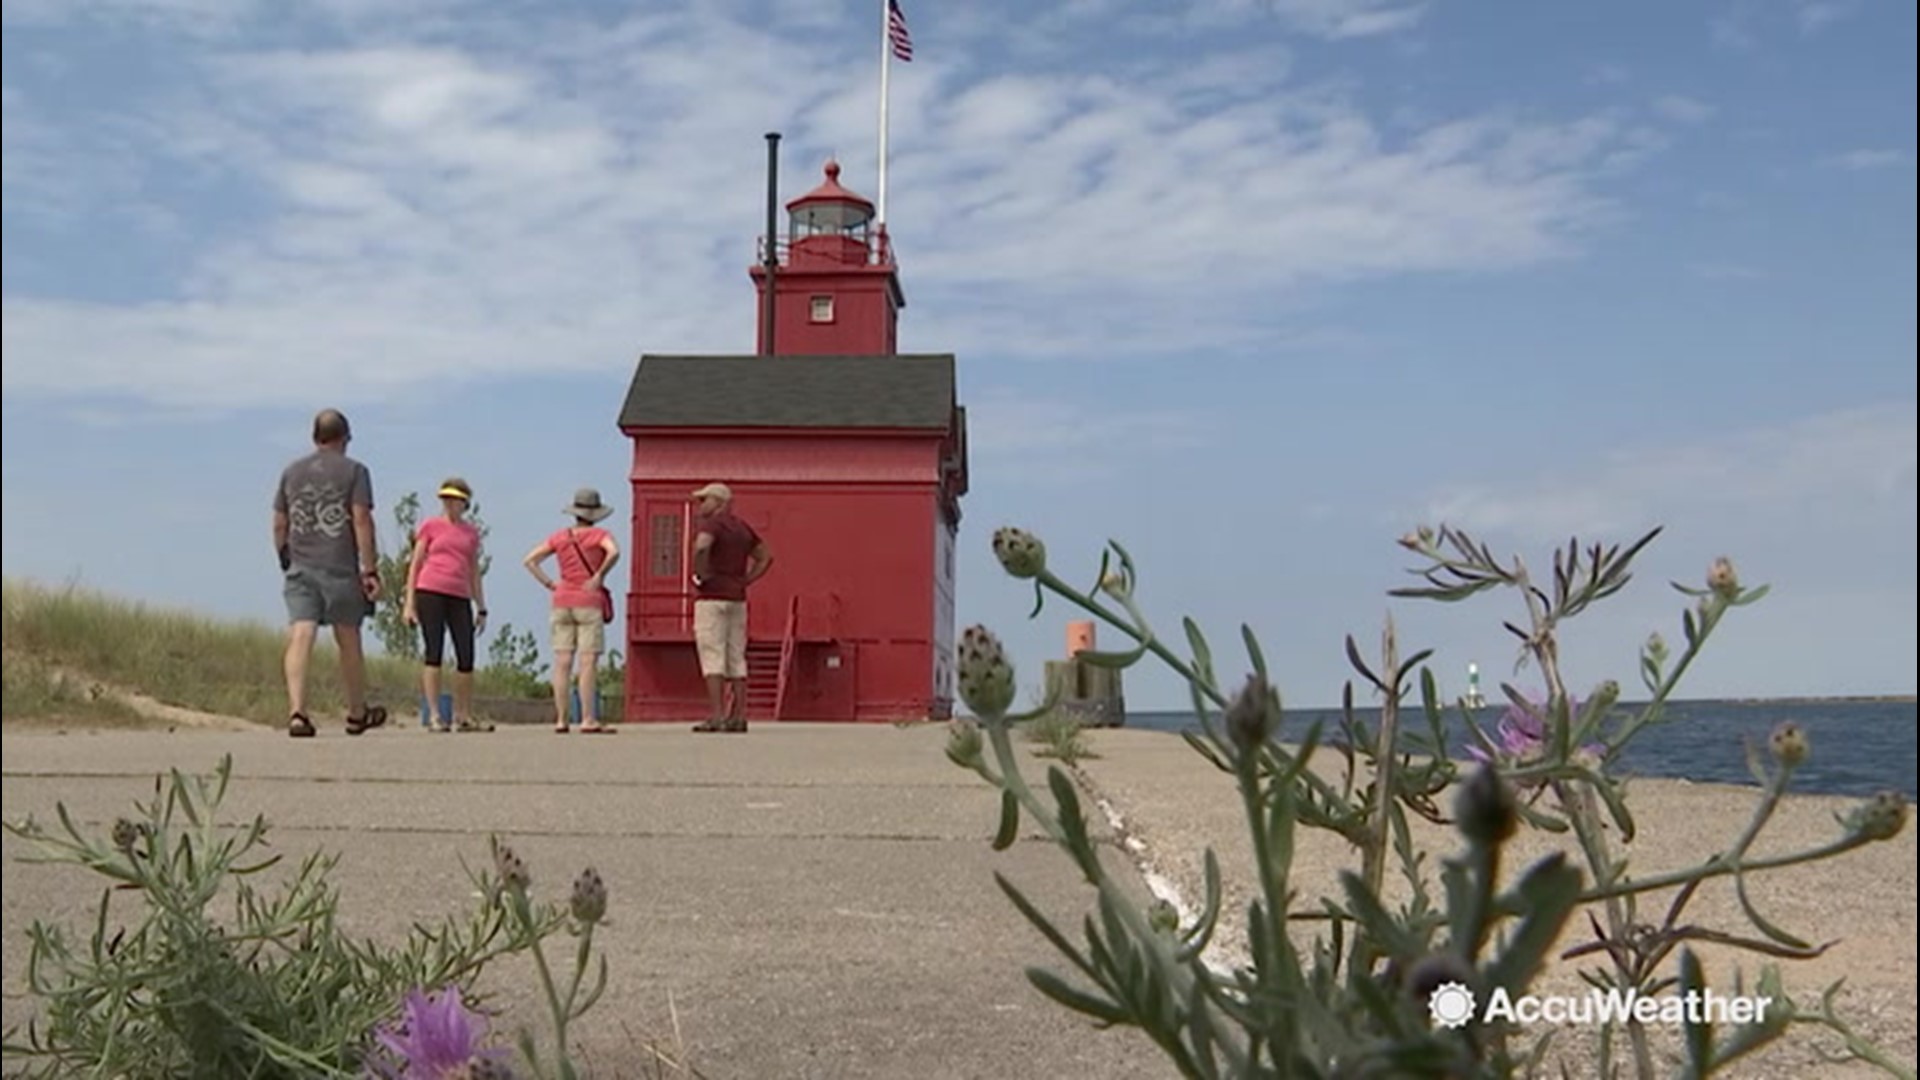 The storied Holland Harbor Light, locally known as 'Big Red,' in Ottawa County, Michigan, has been helping mariners navigate around Lake Michigan since the 1870s. AccuWeather's Laura Velasquez toured the facility and learned all about what makes lighthouses important.